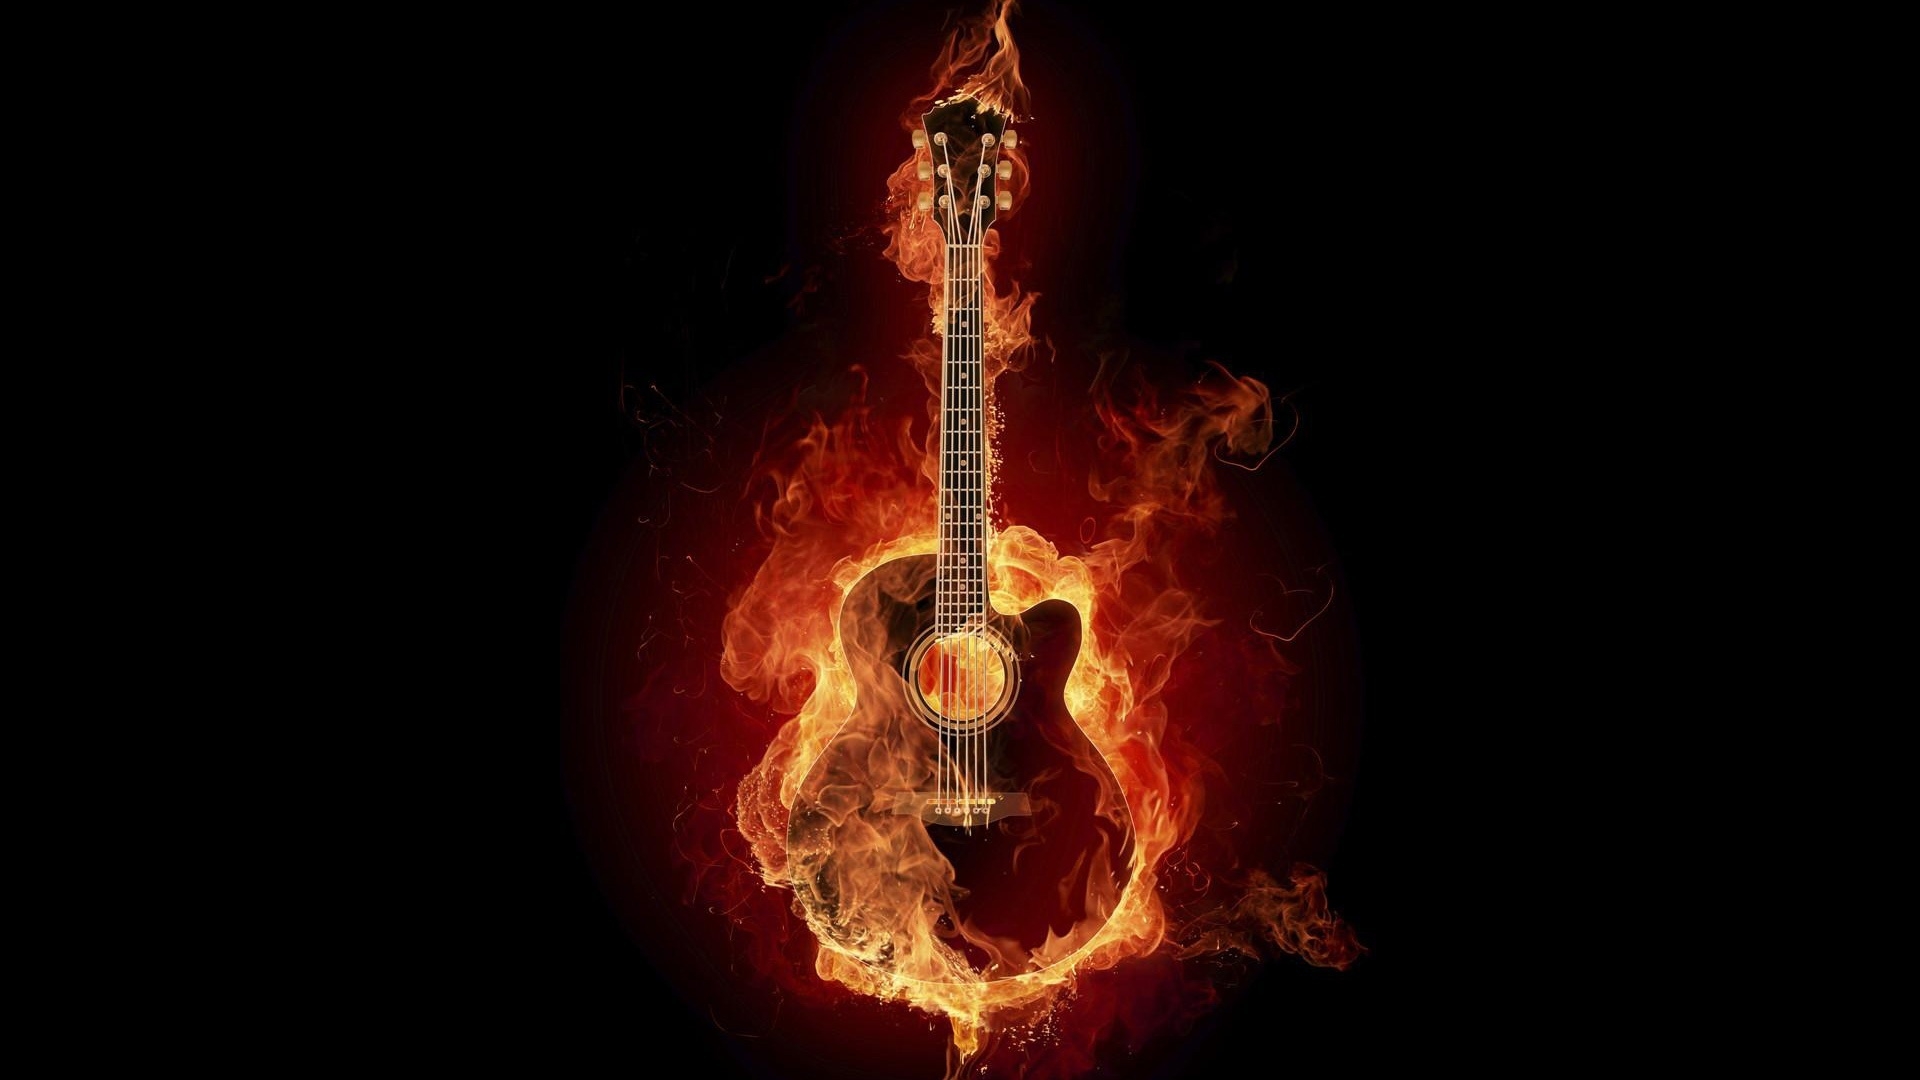 Great Fire Guitar for 1920 x 1080 HDTV 1080p resolution